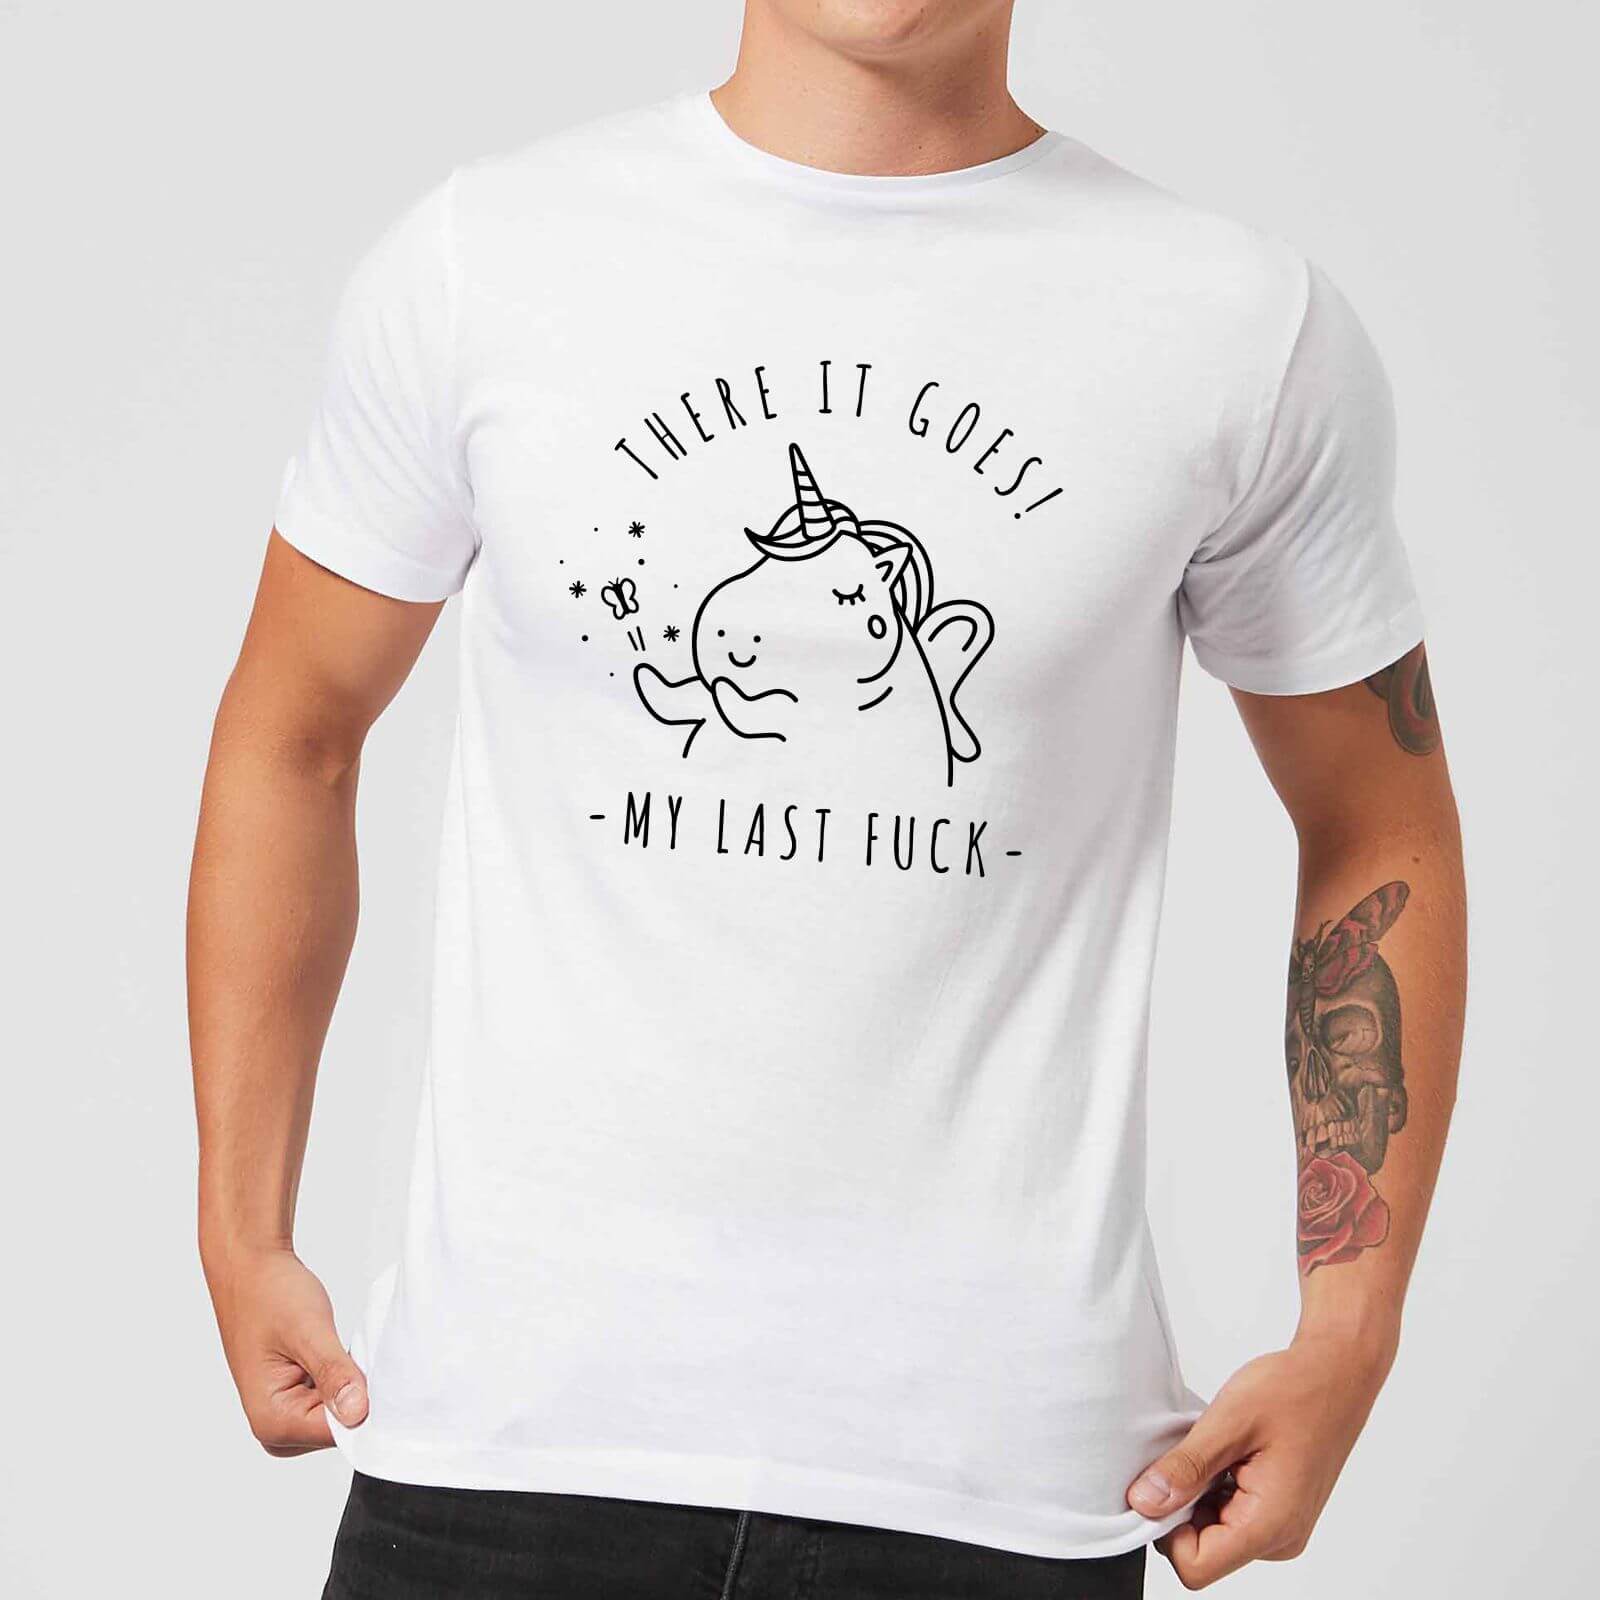 There It Goes, My Last F*** Men's T-Shirt - White - S - White